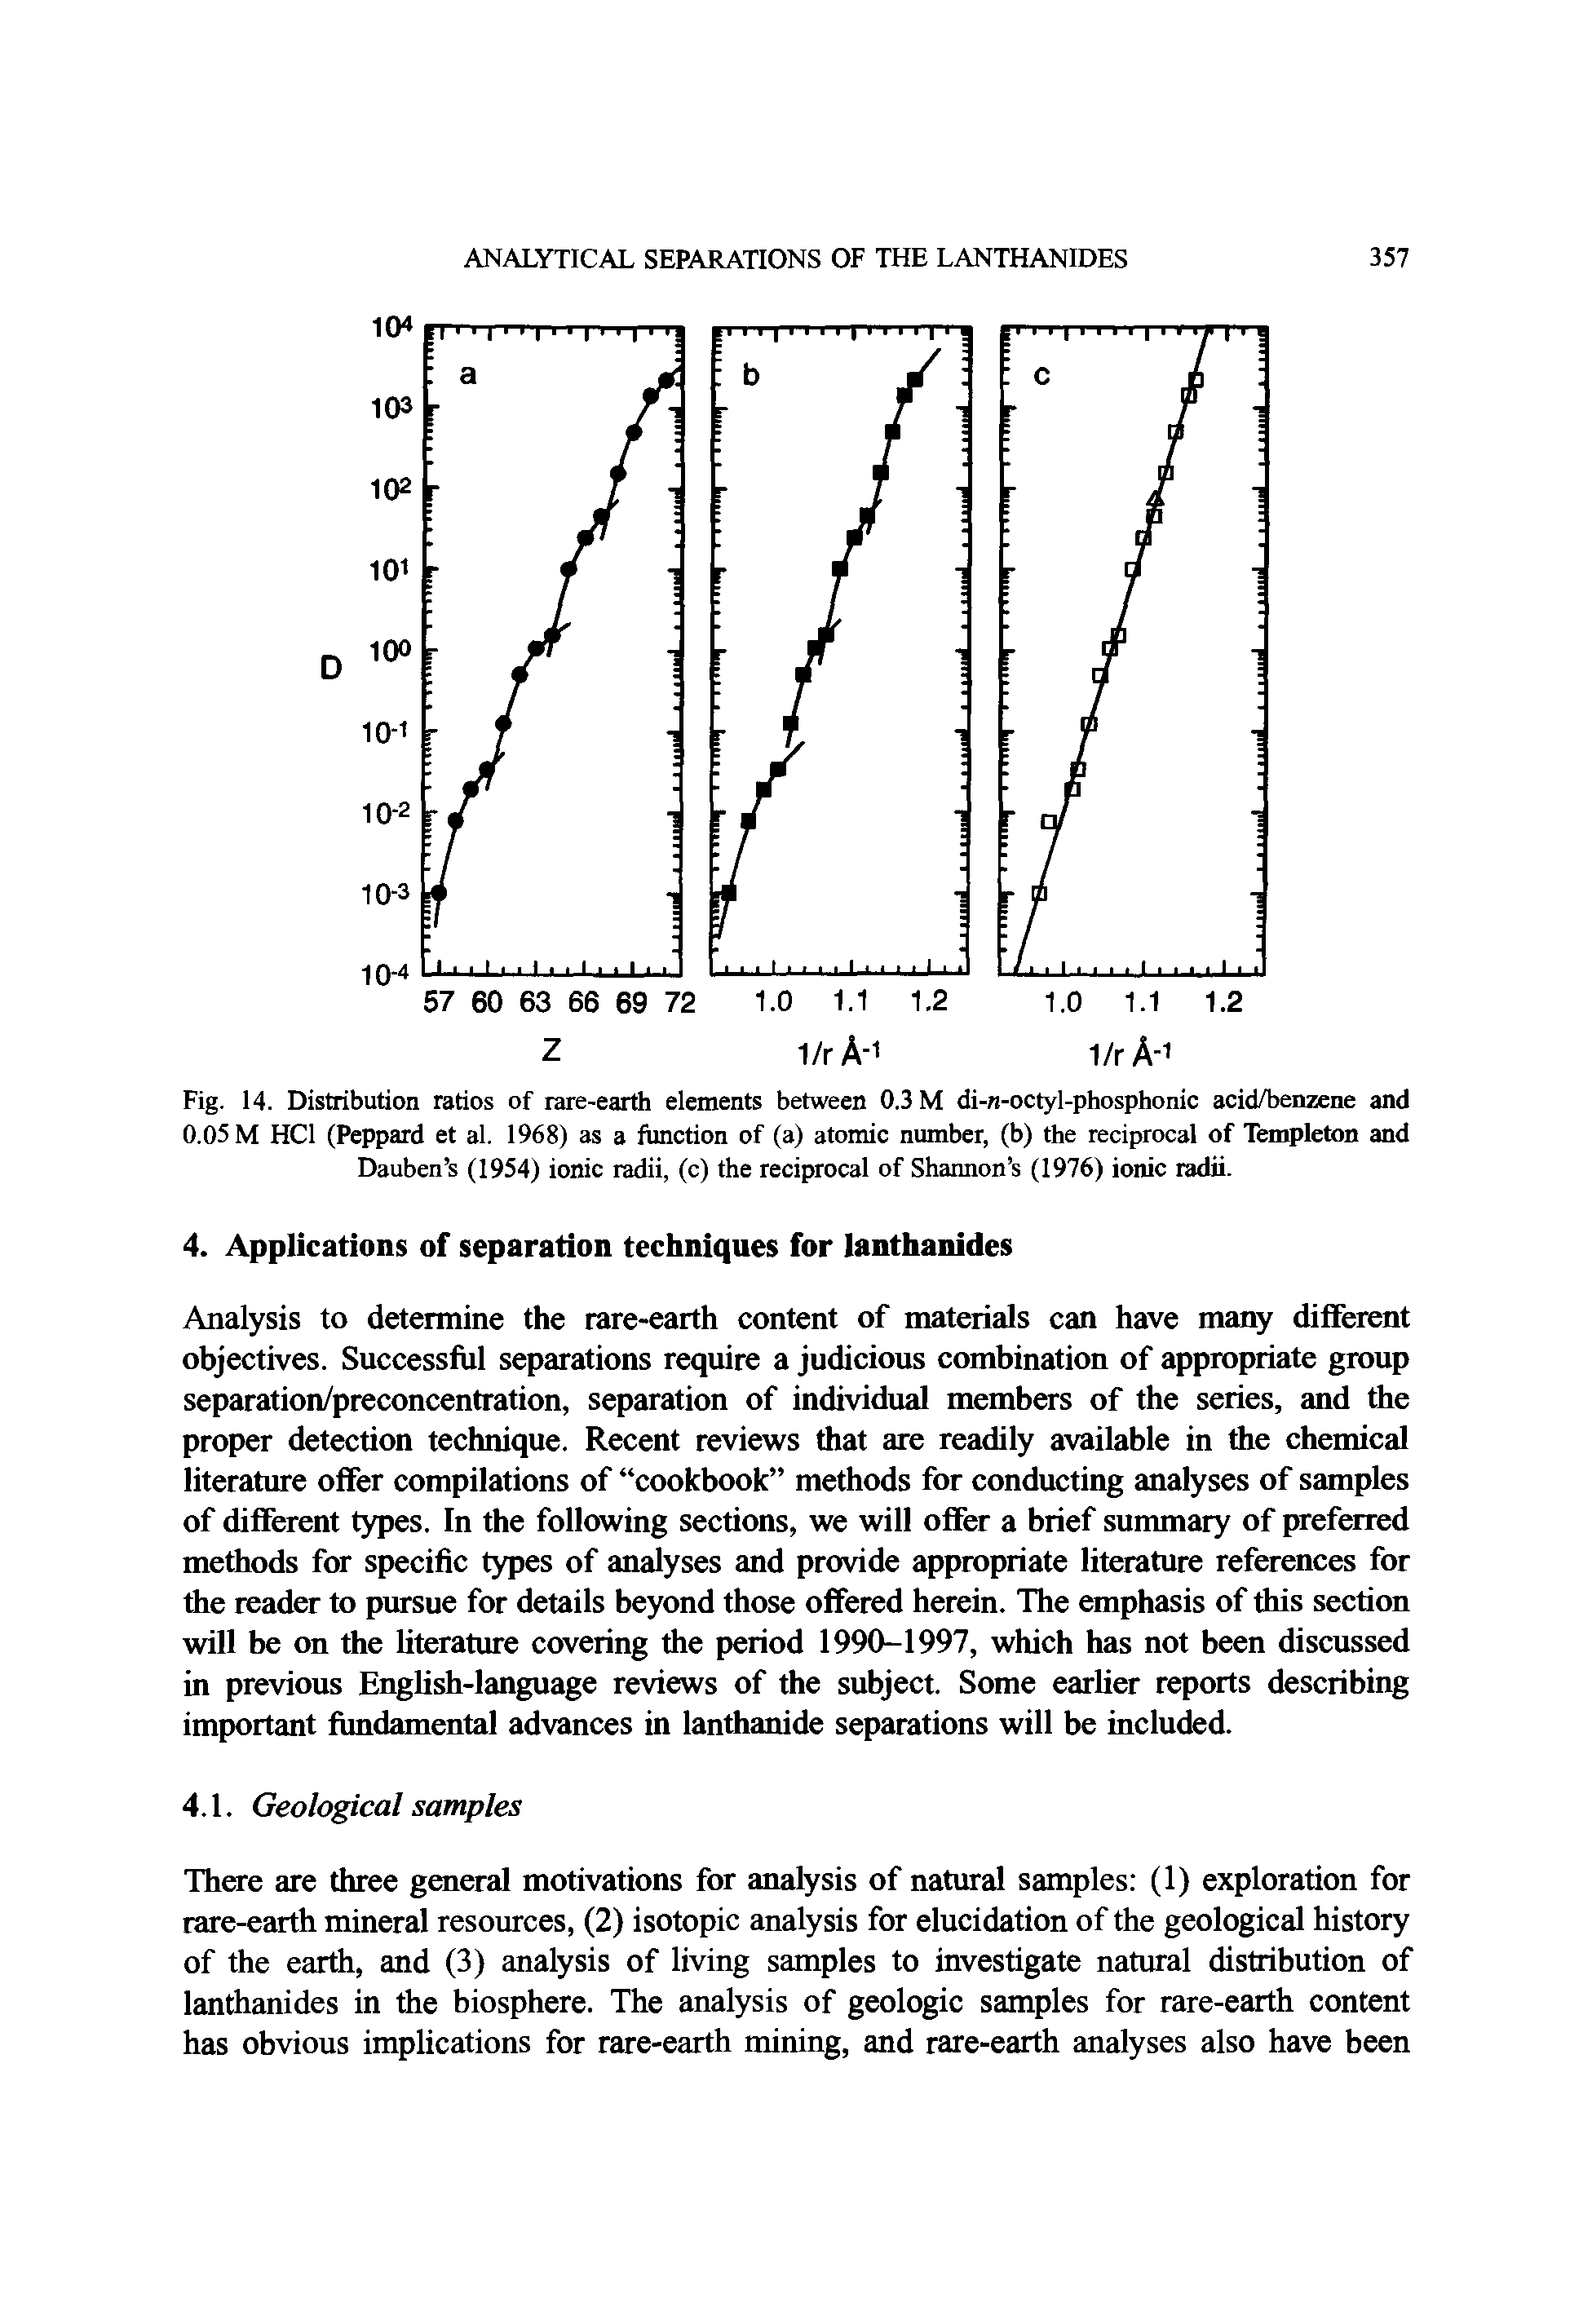 Fig. 14. Distribution ratios of rare-earth elements between 0.3 M di-n-octyl-phosphonic acid/benzene and 0.05 M HCl (Peppard et al. 1968) as a function of (a) atomic number, (b) the reciprocal of Templeton and Dauben s (1954) ionic radii, (c) the reciprocal of Shannon s (1976) ionic radii.